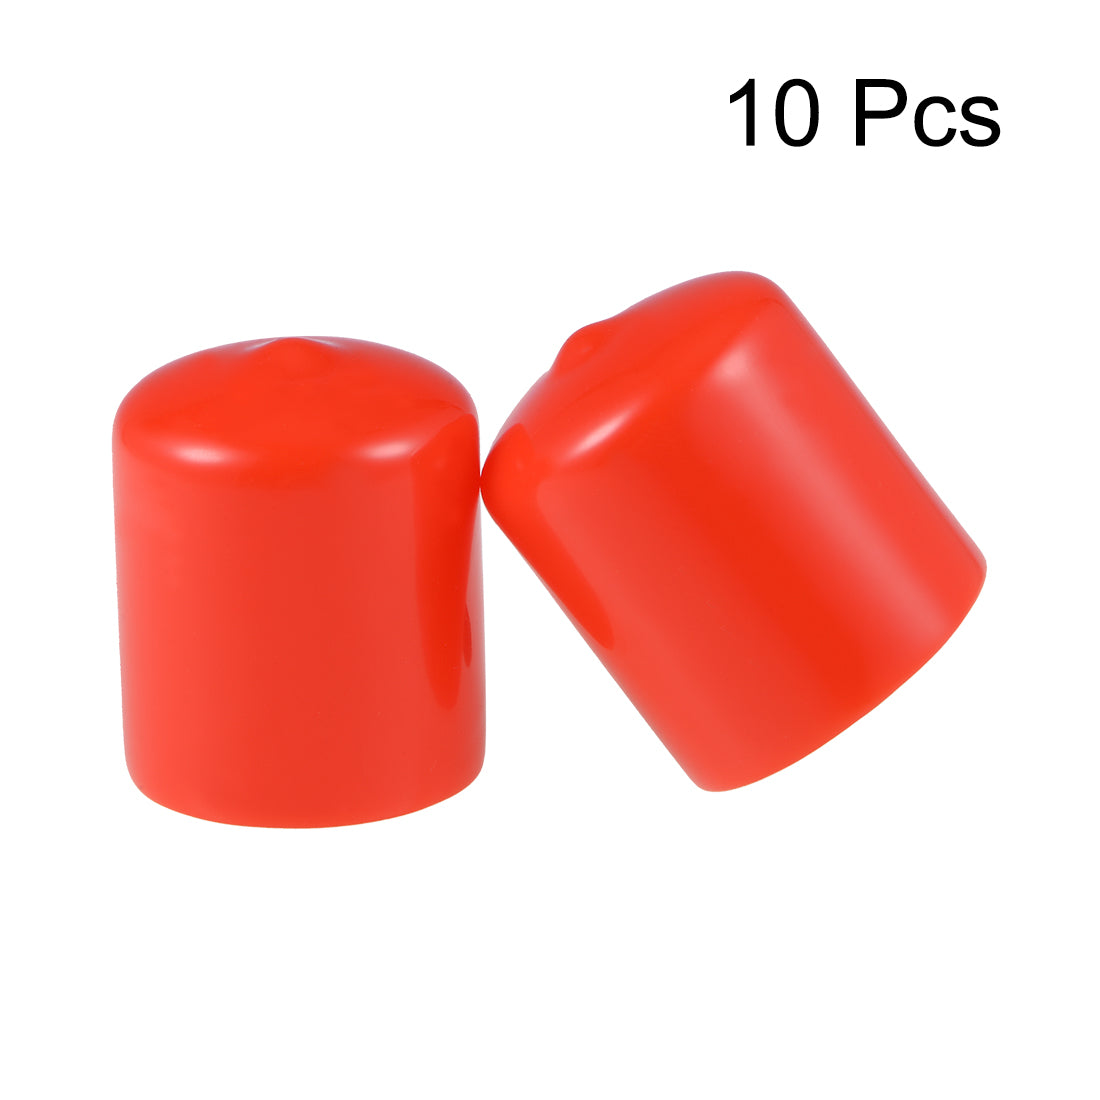 uxcell Uxcell Screw Thread Protector, 30mm ID Round End Cap Cover Red Tube Caps 10pcs